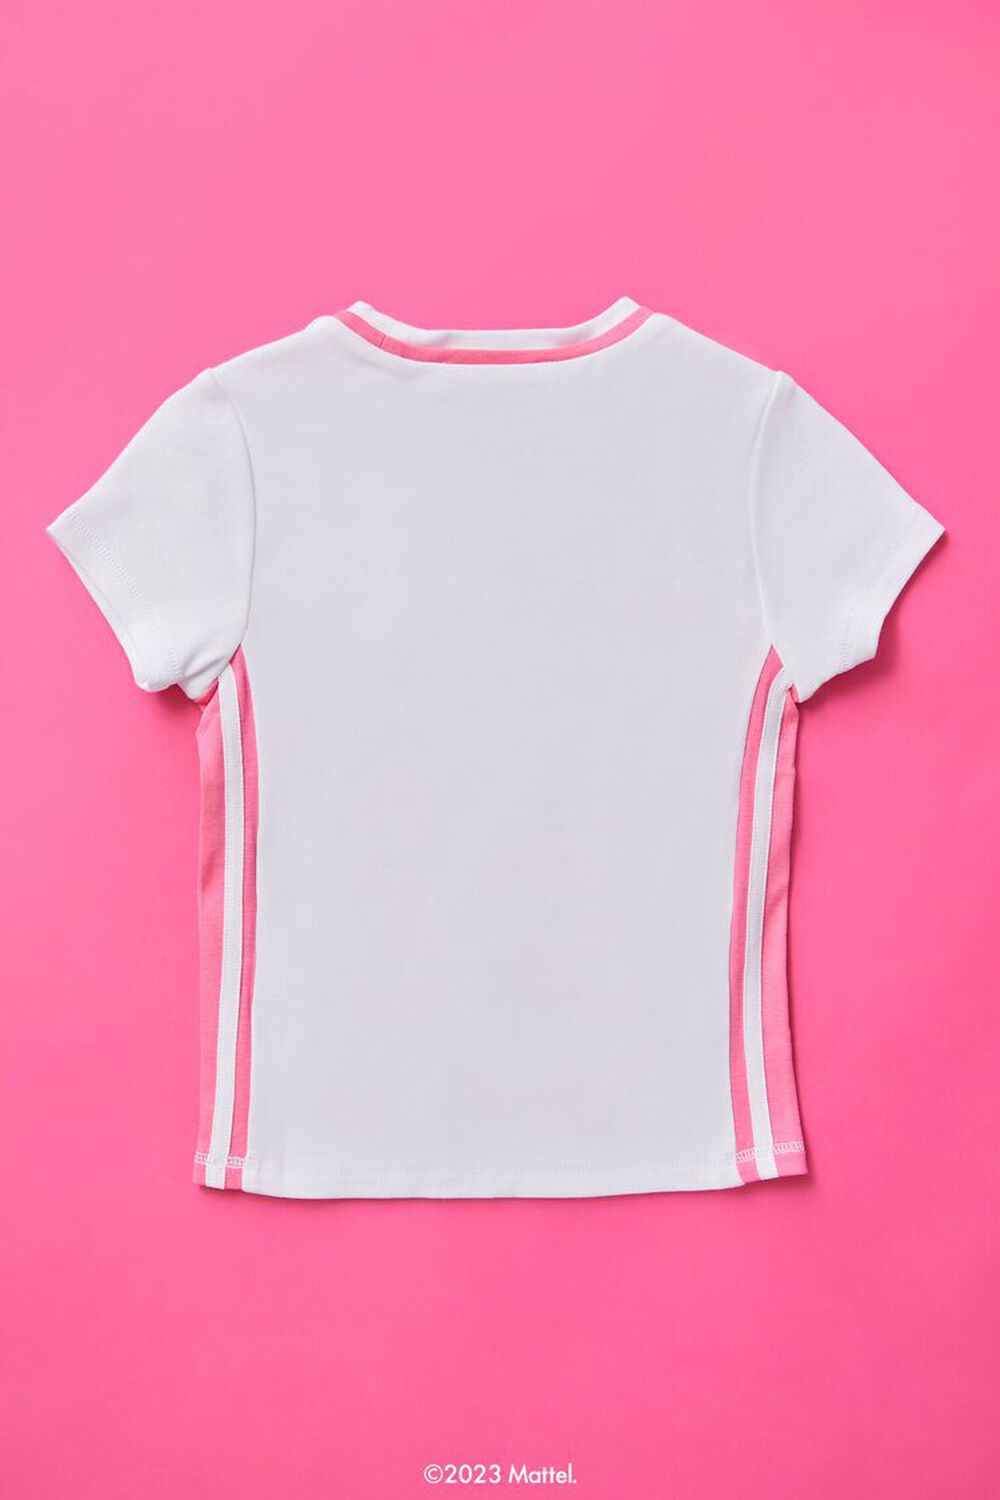 WHITE/PINK Girls Embroidered Barbie Tee (Kids), image 2